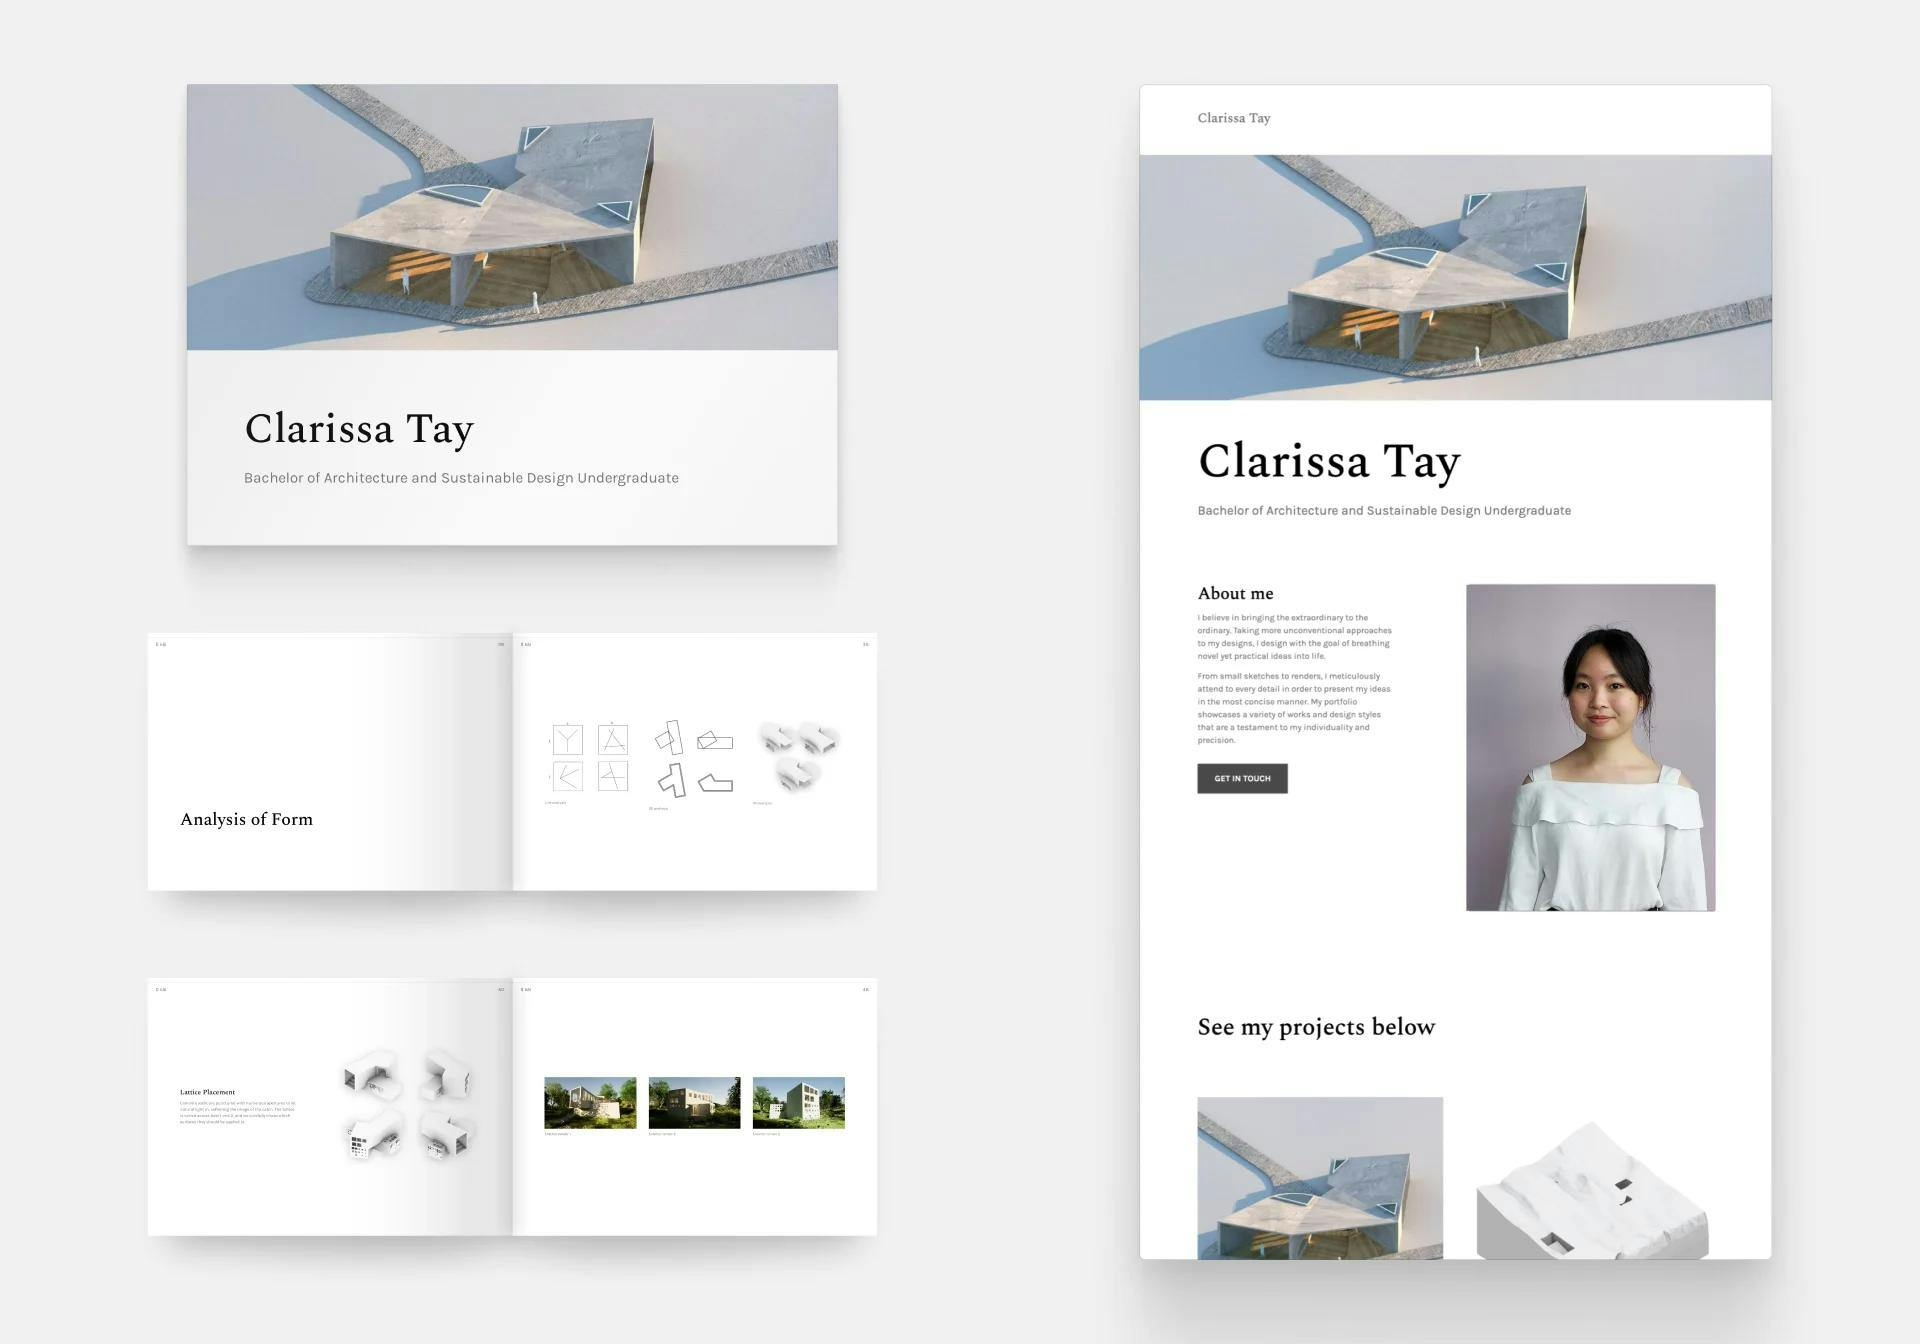 Two formats of the same portfolio by Clarissa Tay. She created her portfolio with Archifolio, which allowed her to create a website and a PDF at the same time.